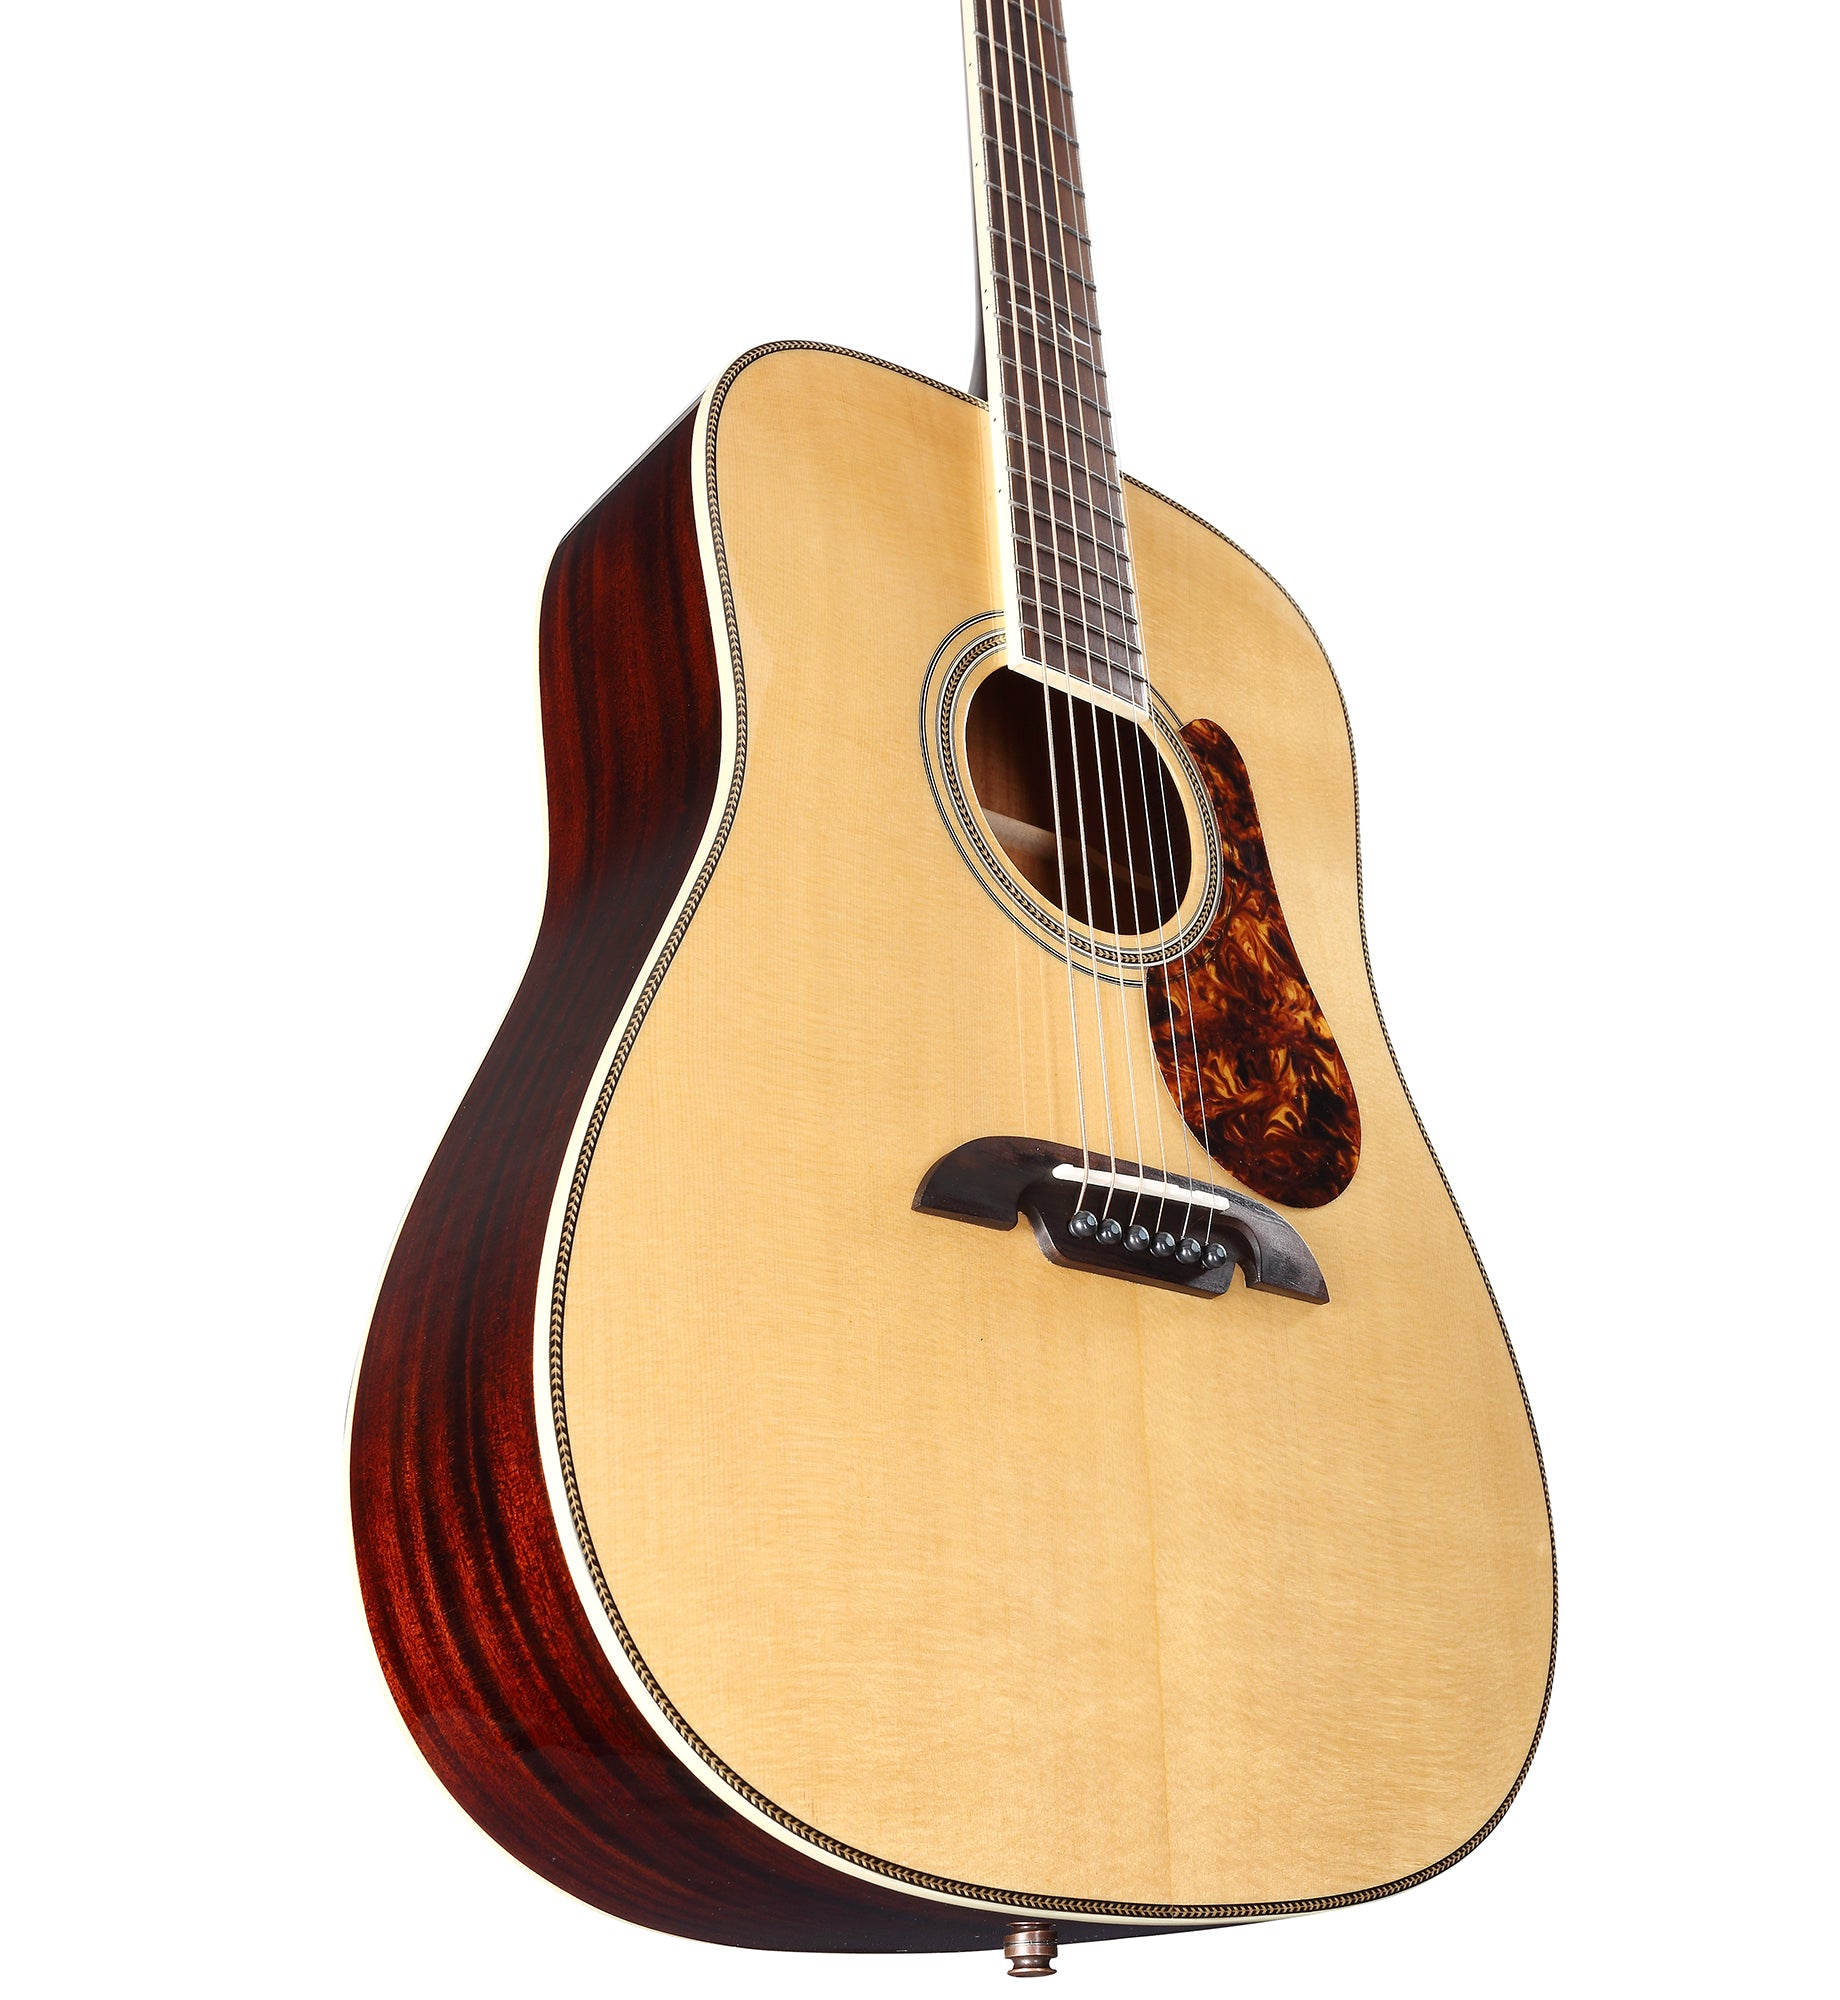 ALVAREZ MASTERWORKS MD60EBG BLUEGRASS DREADNOUGHT ELECTRIC ACOUSTIC IN NATURAL GLOSS FINISH - The Guitar World